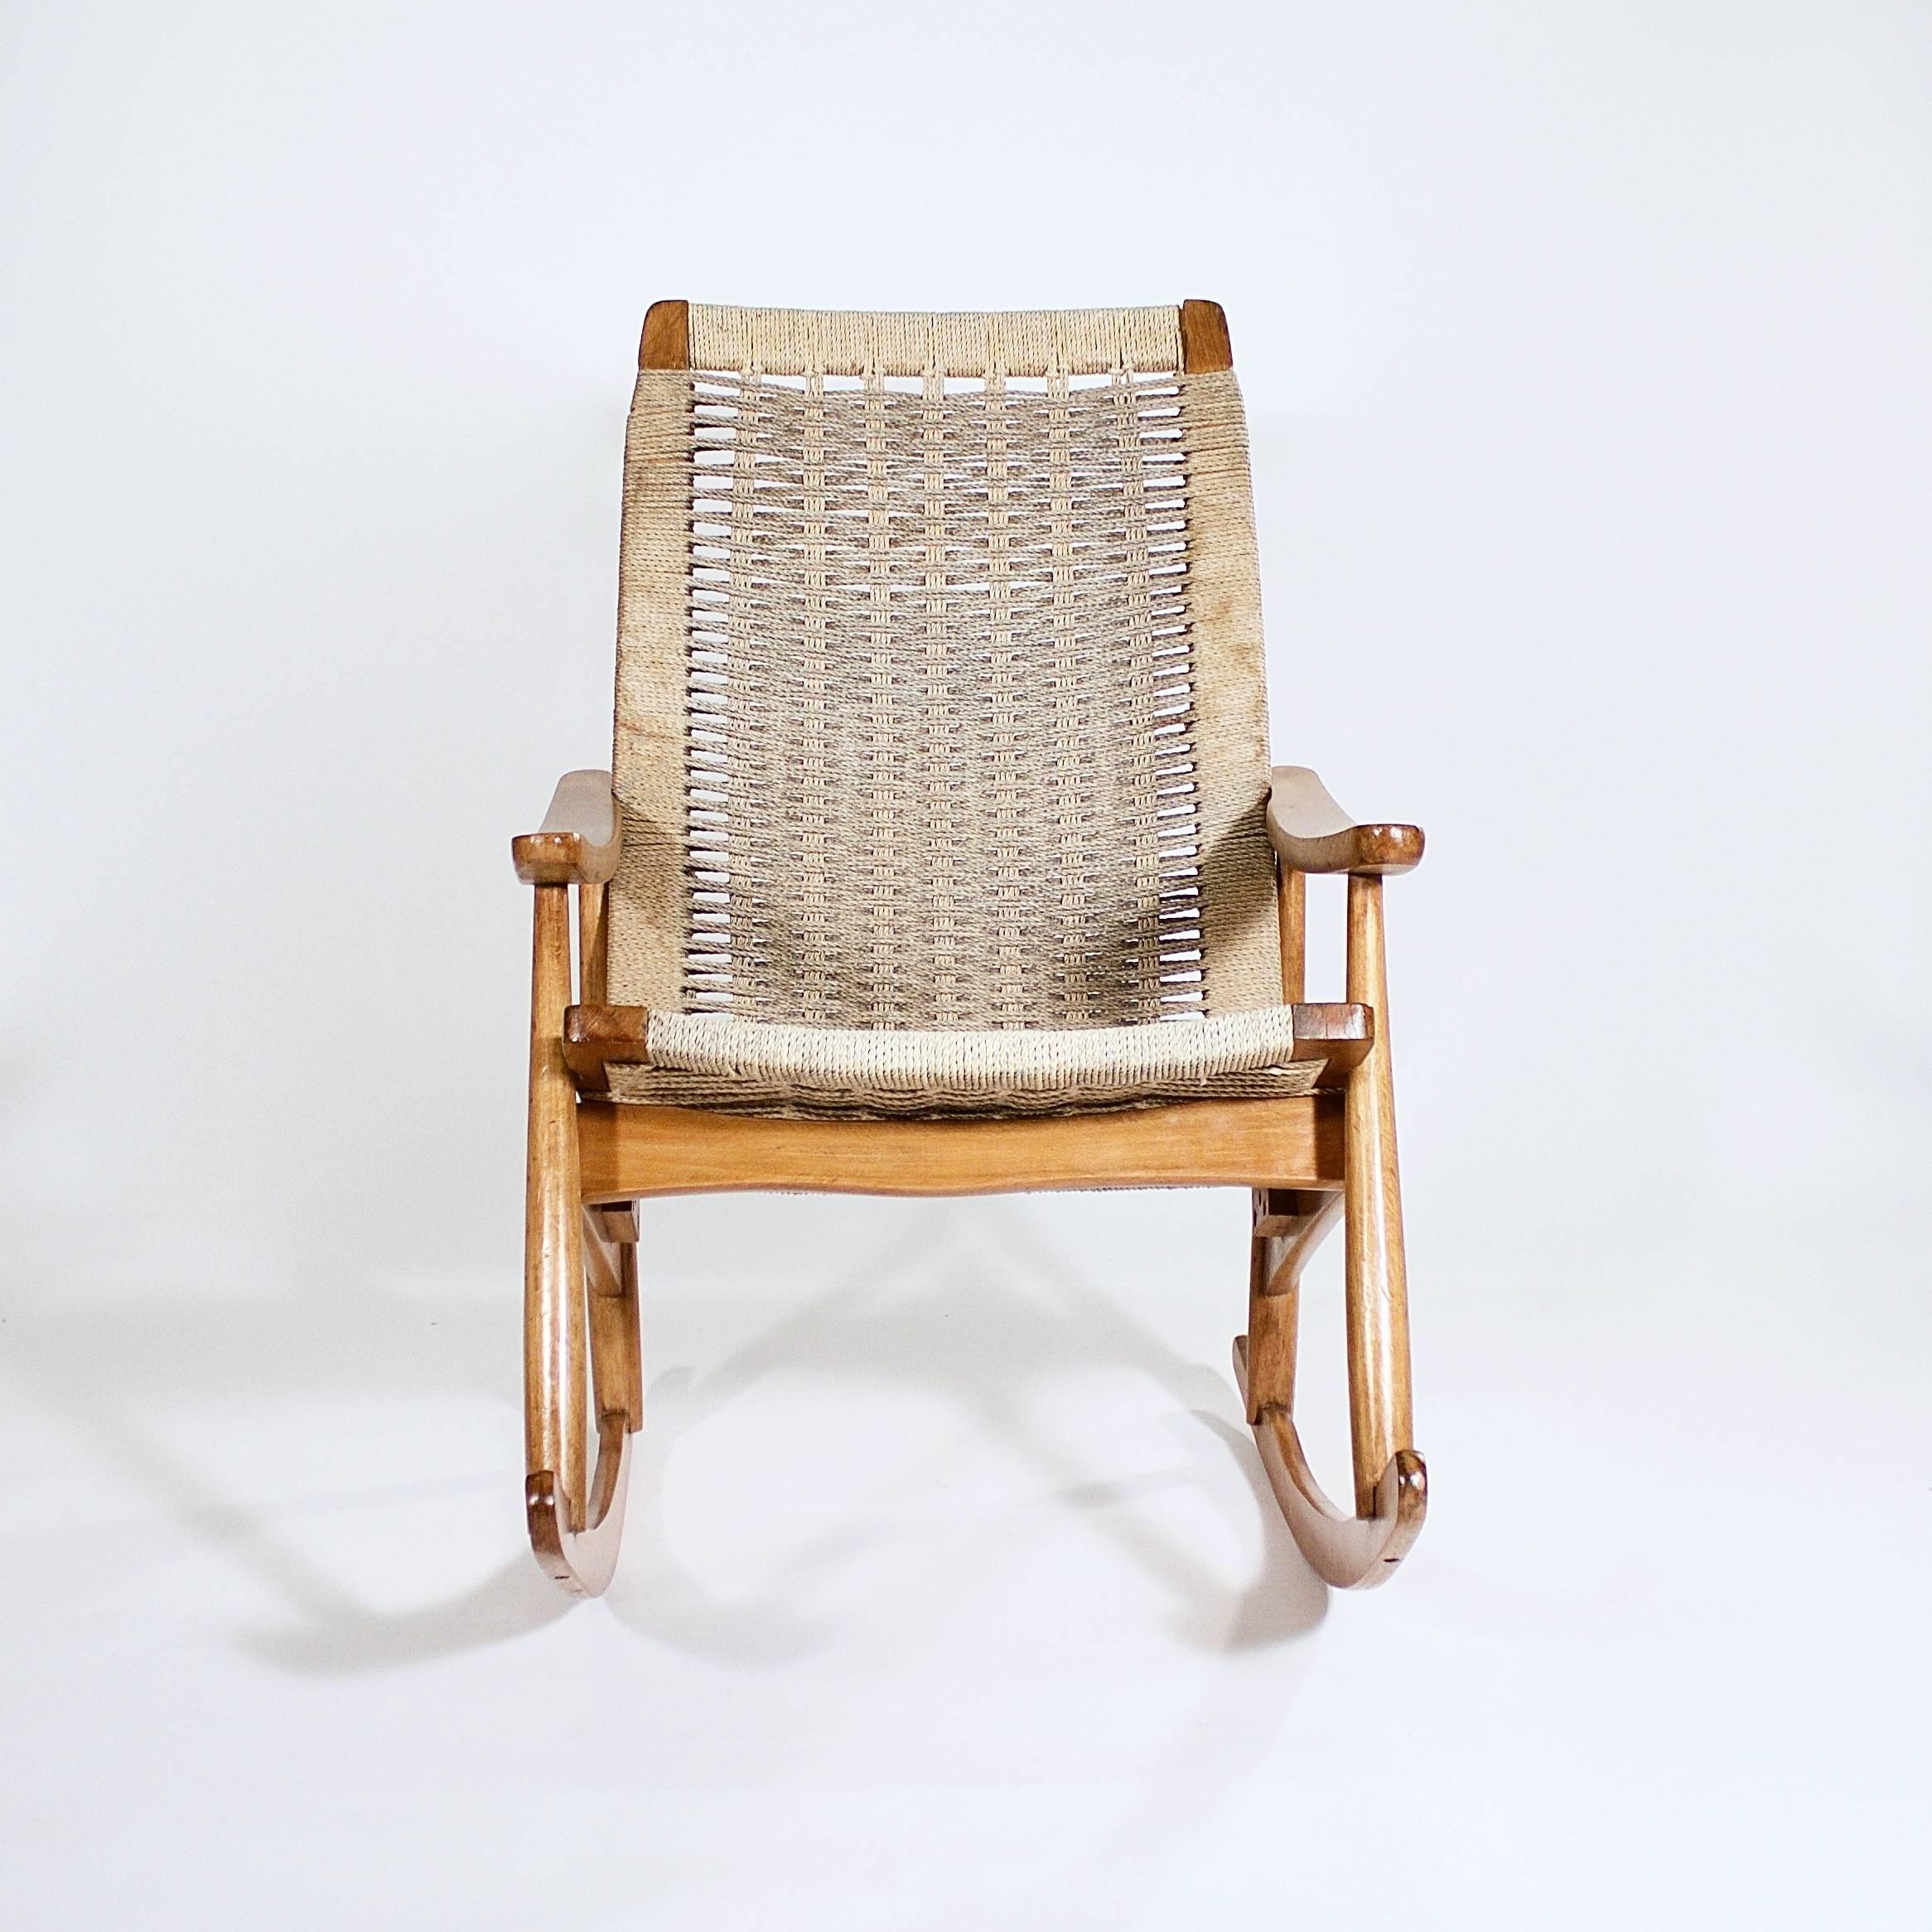 The raked back and seat with woven cord supported by a teak rocking frame with curving arms,

Denmark, circa 1950s.